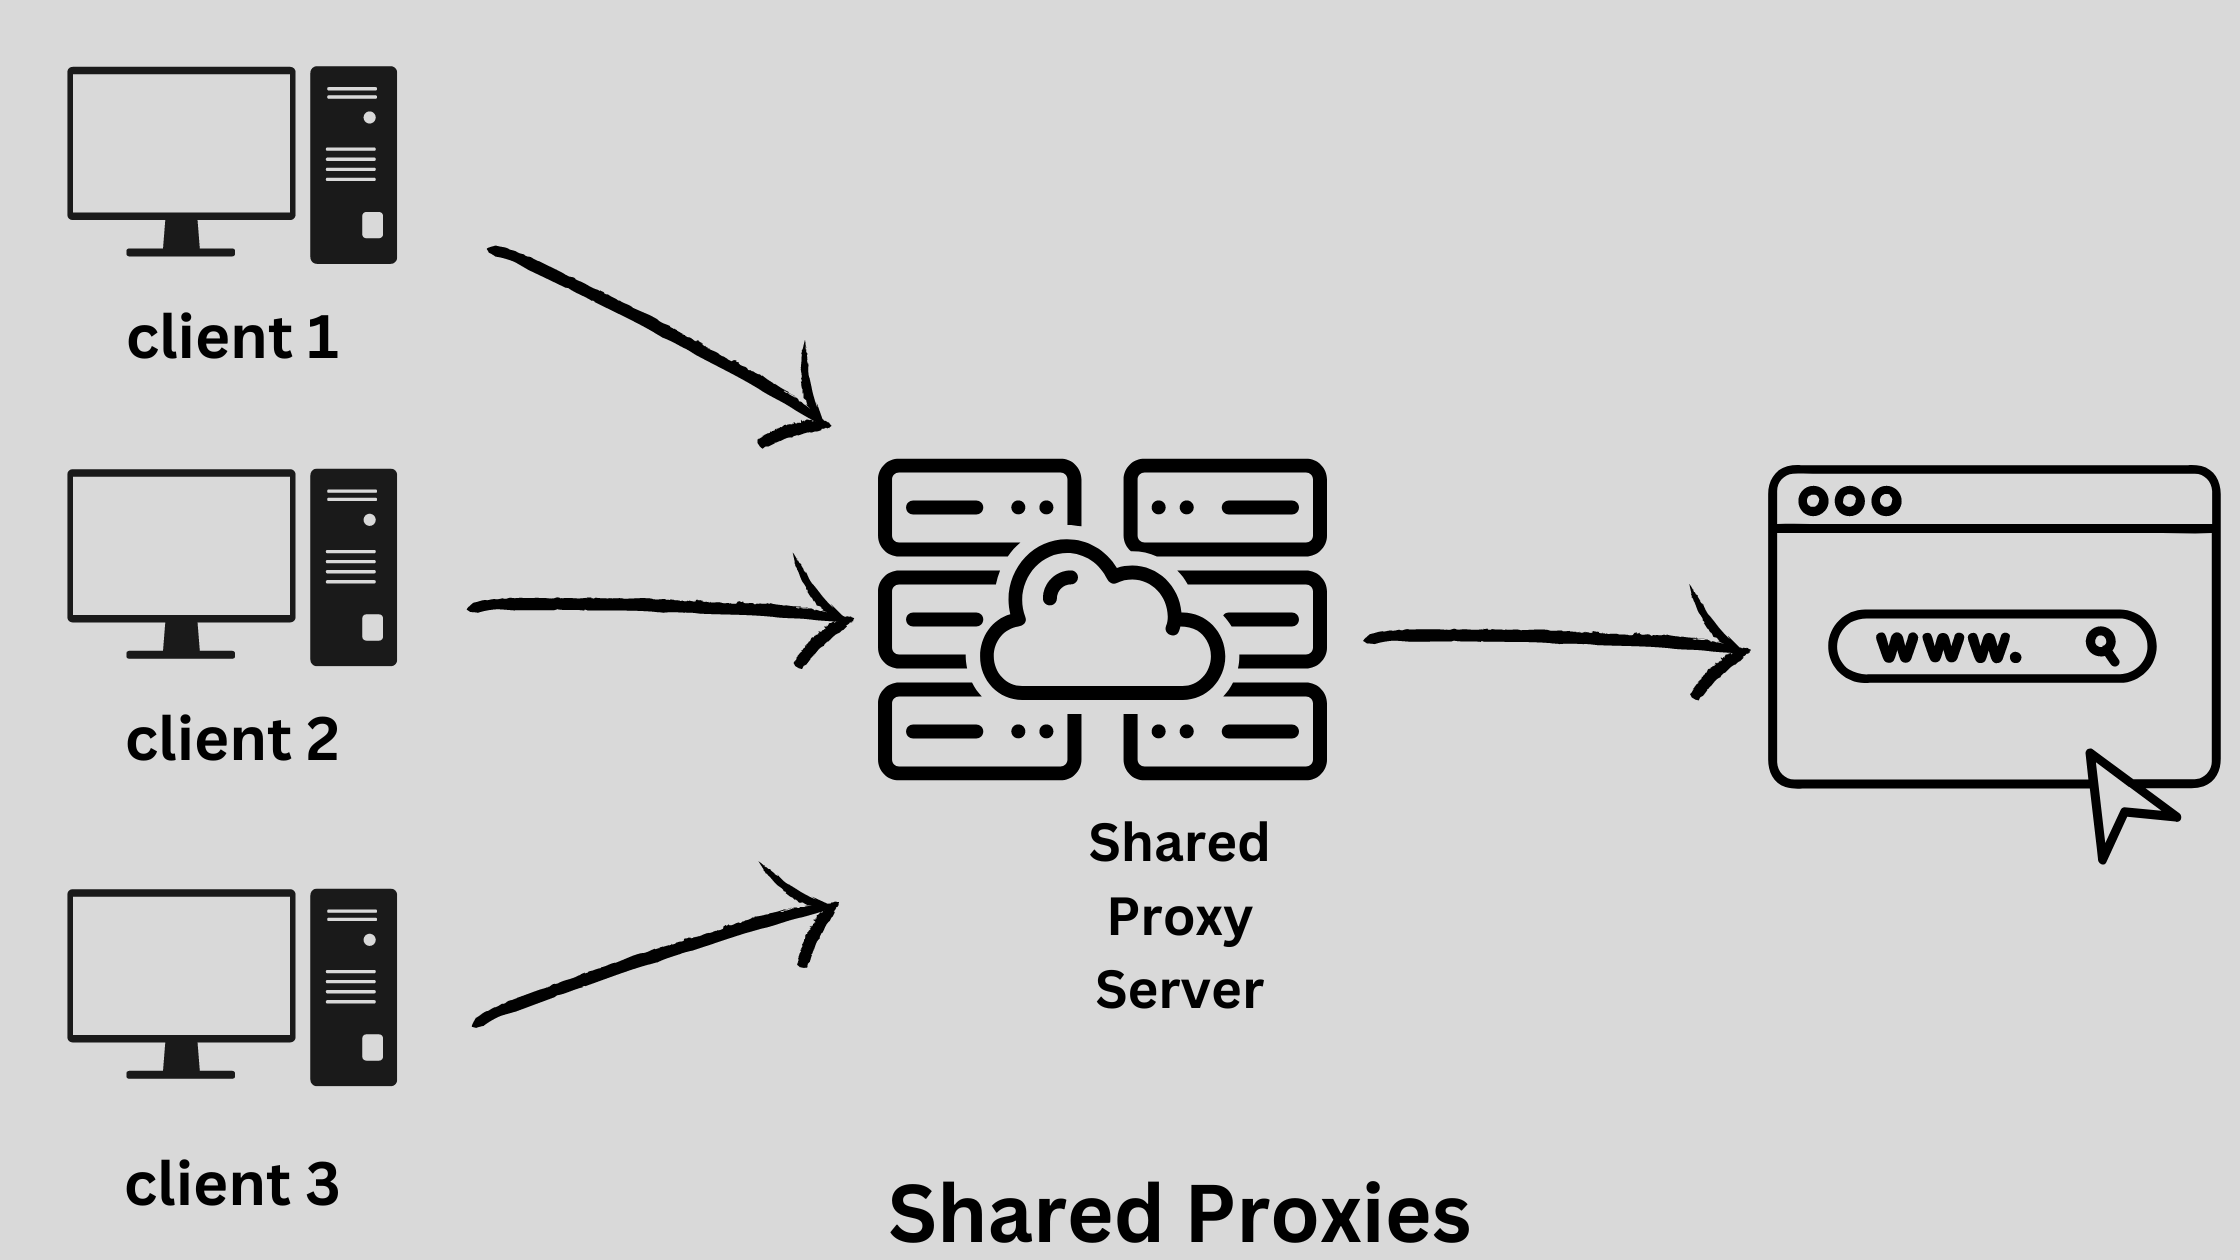 How Does a Shared Proxy Work?